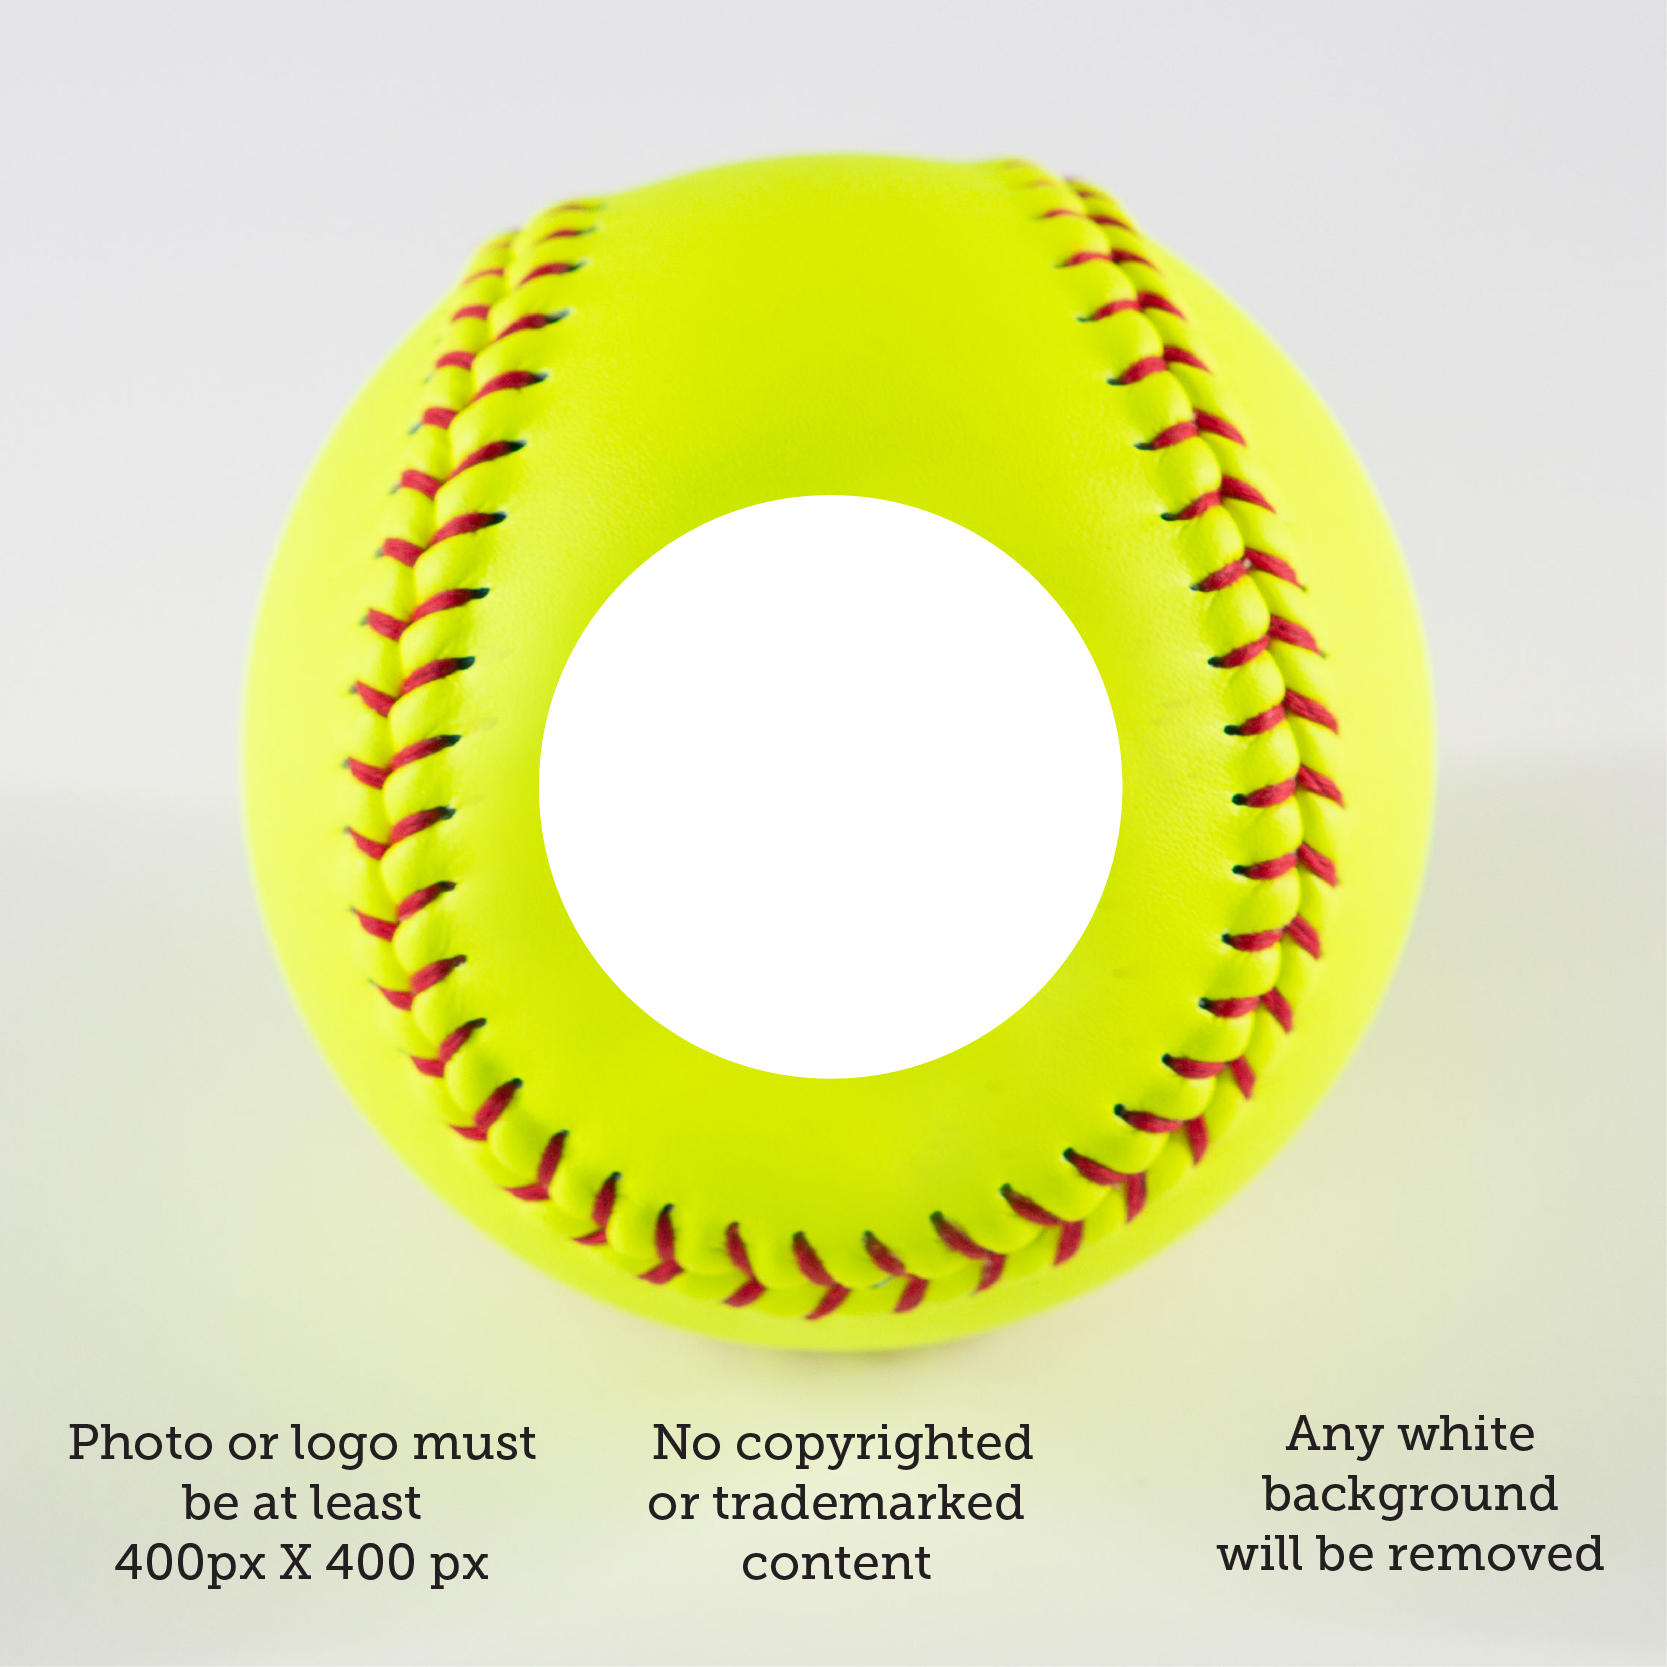 Happy Father's Day, Printed Softball